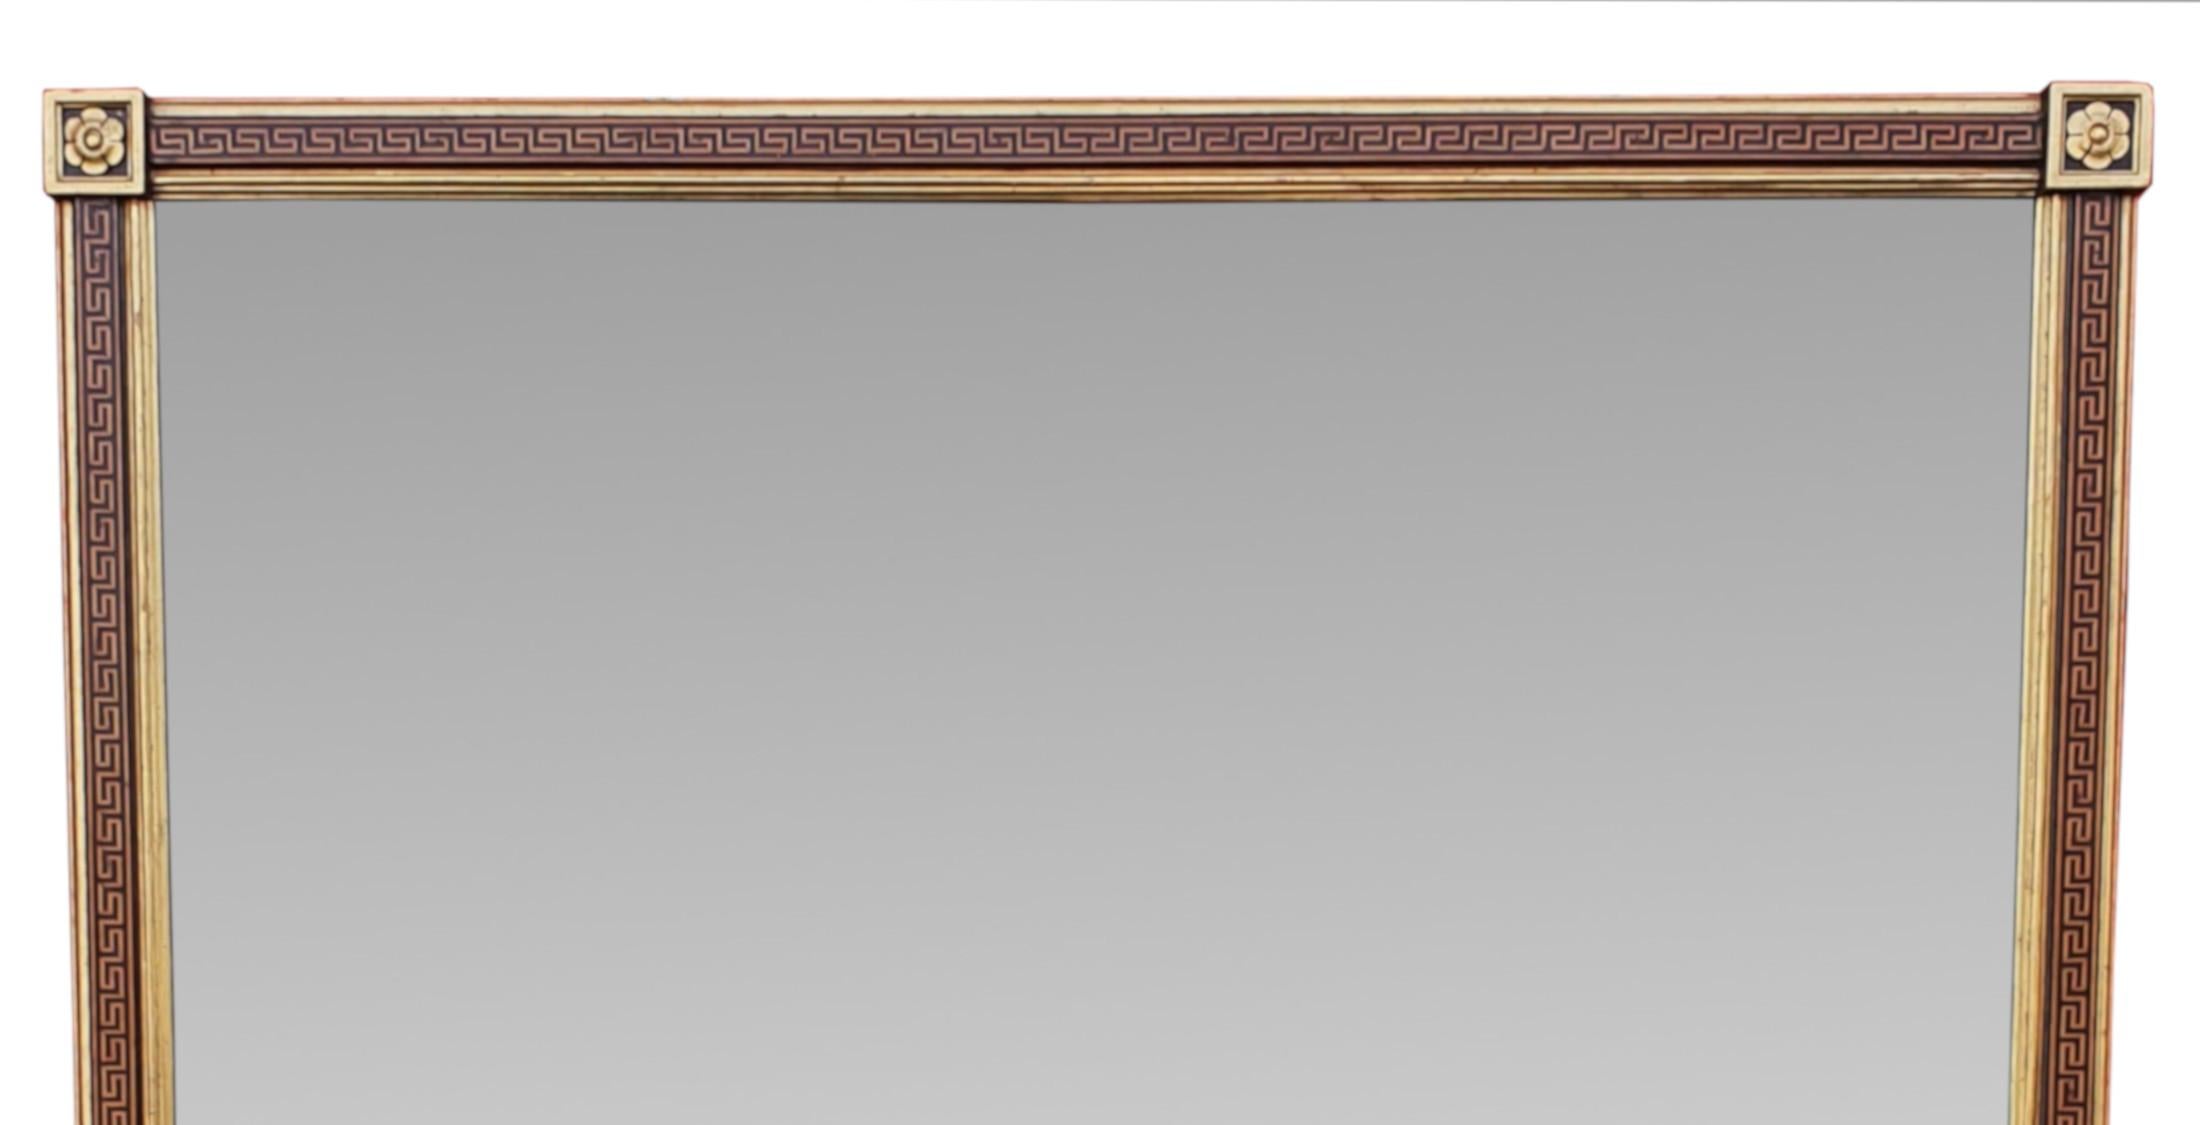 A very rare large size 19th Century giltwood overmantle mirror. The mirror plate of rectangular form set within a stunningly carved giltwood and ebonised frame with Neoclassical greek key carving and with applied flower head and s-scroll motif